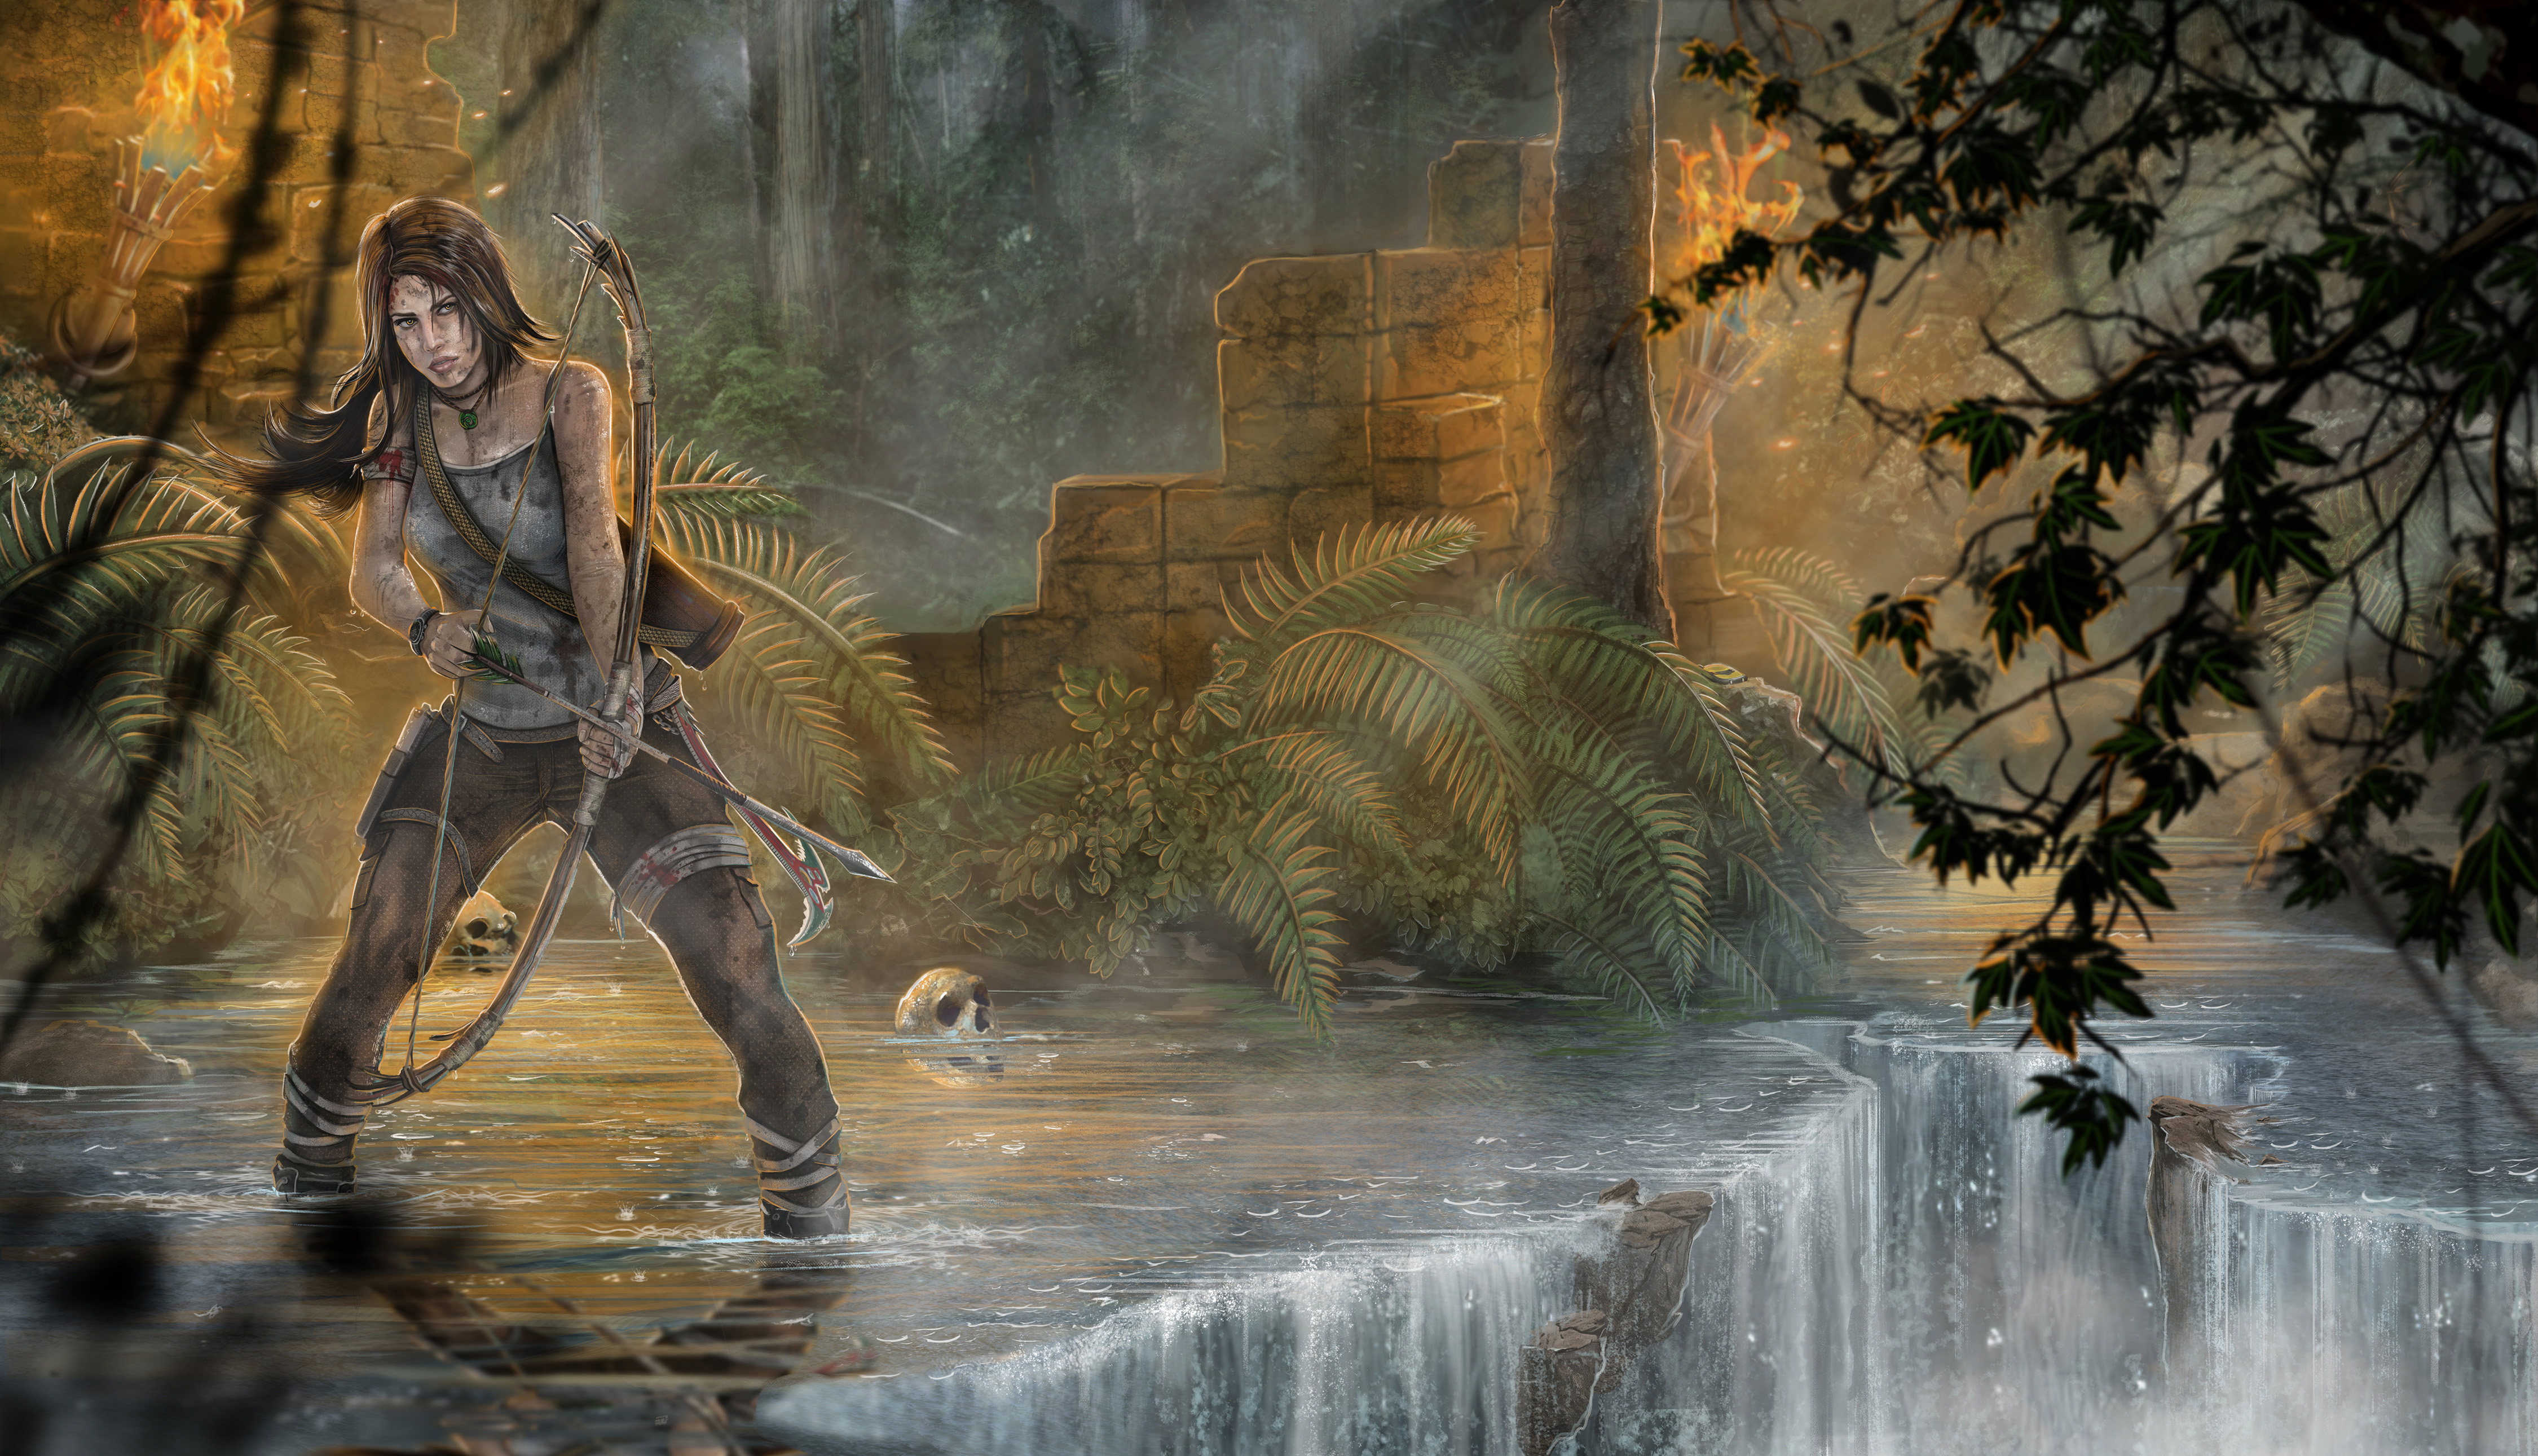 1361644155-lara-croft-tracking-the-enemy-by-one-alucard-d5vldo7